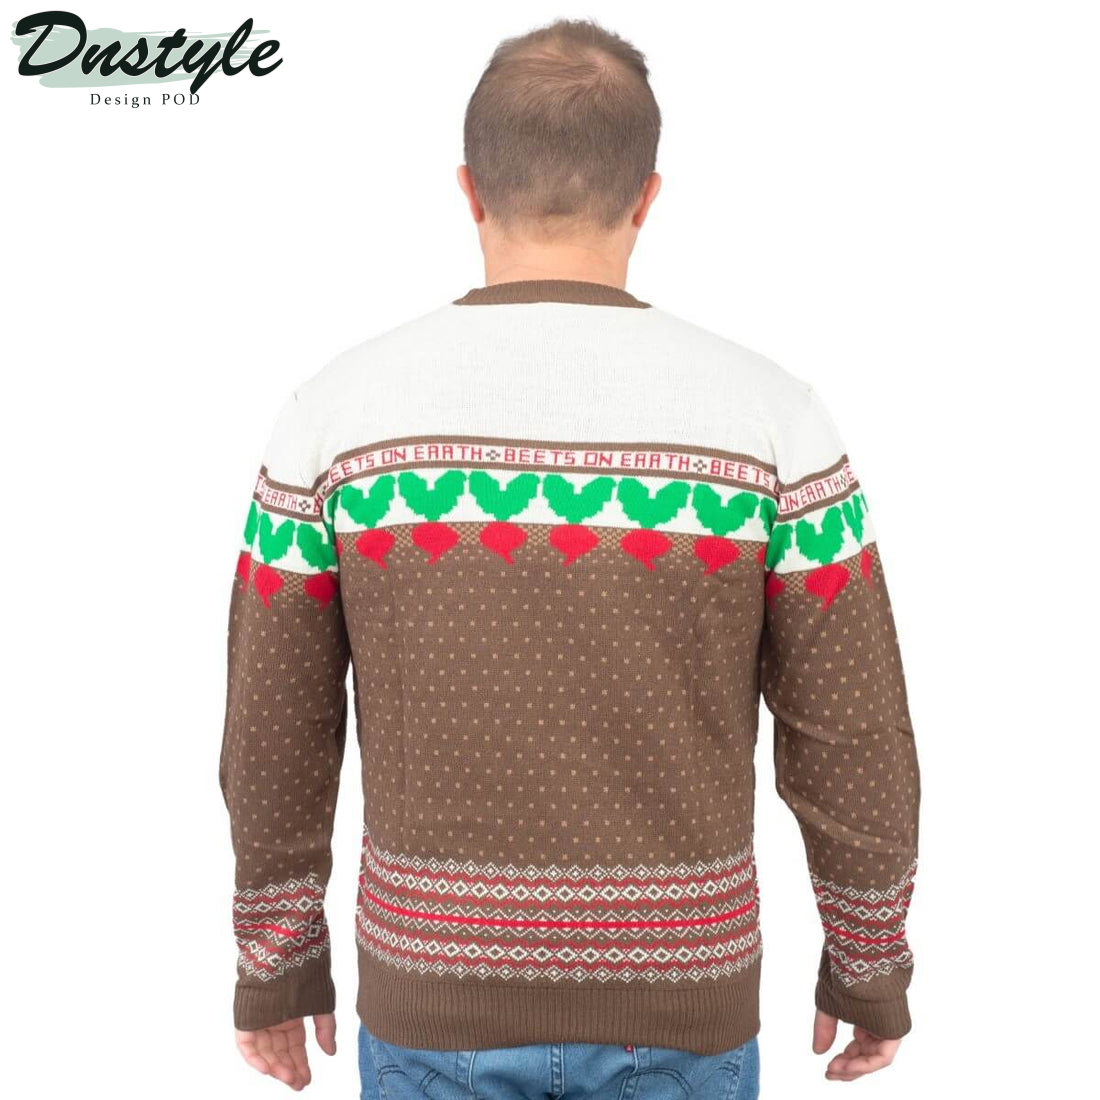 The Office Dwight Schrute Farms Beets Ugly Christmas Sweater